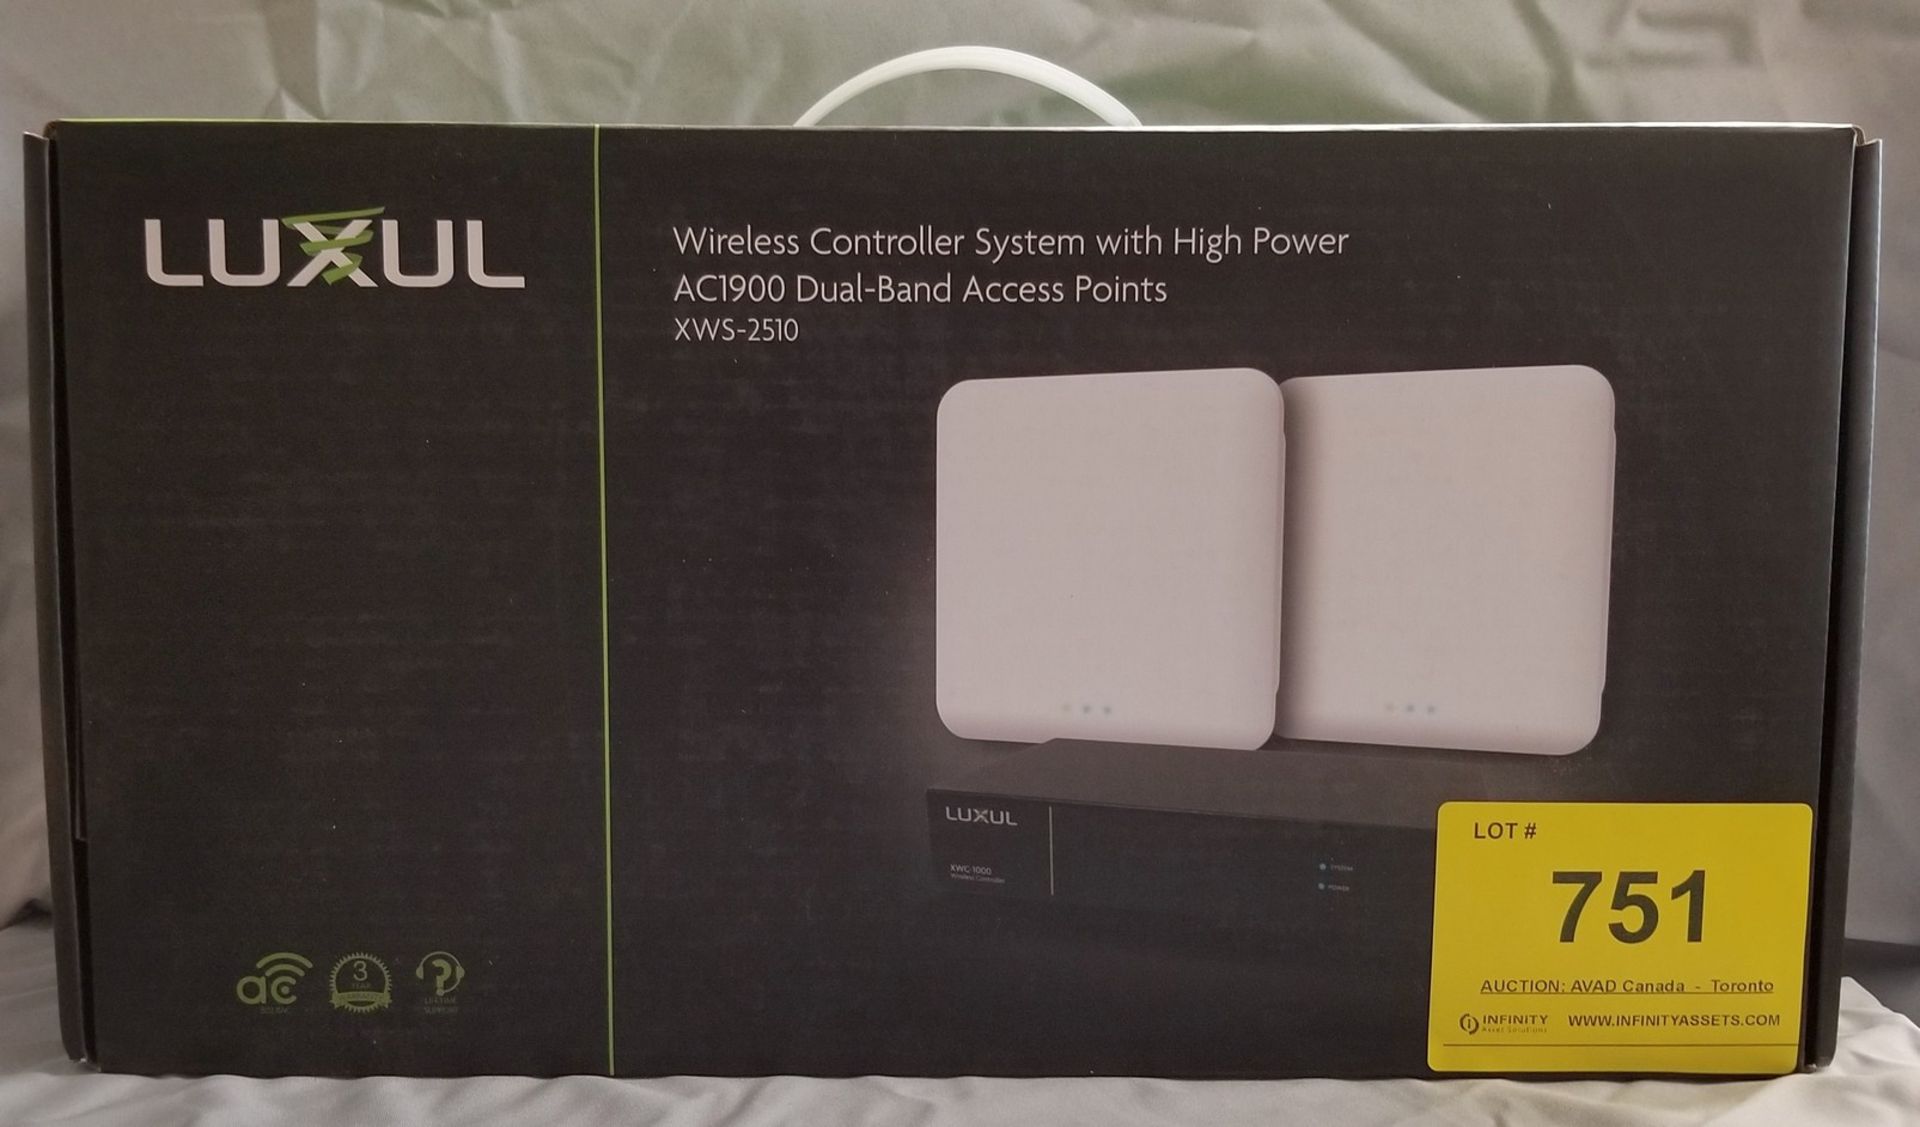 LUXUL, XWS-2510 WIRELESS CONTROLLER SYSTEM WITH HIGH POWER ACI900 DUAL-BAND ACCESS POINTS - (BNIB)